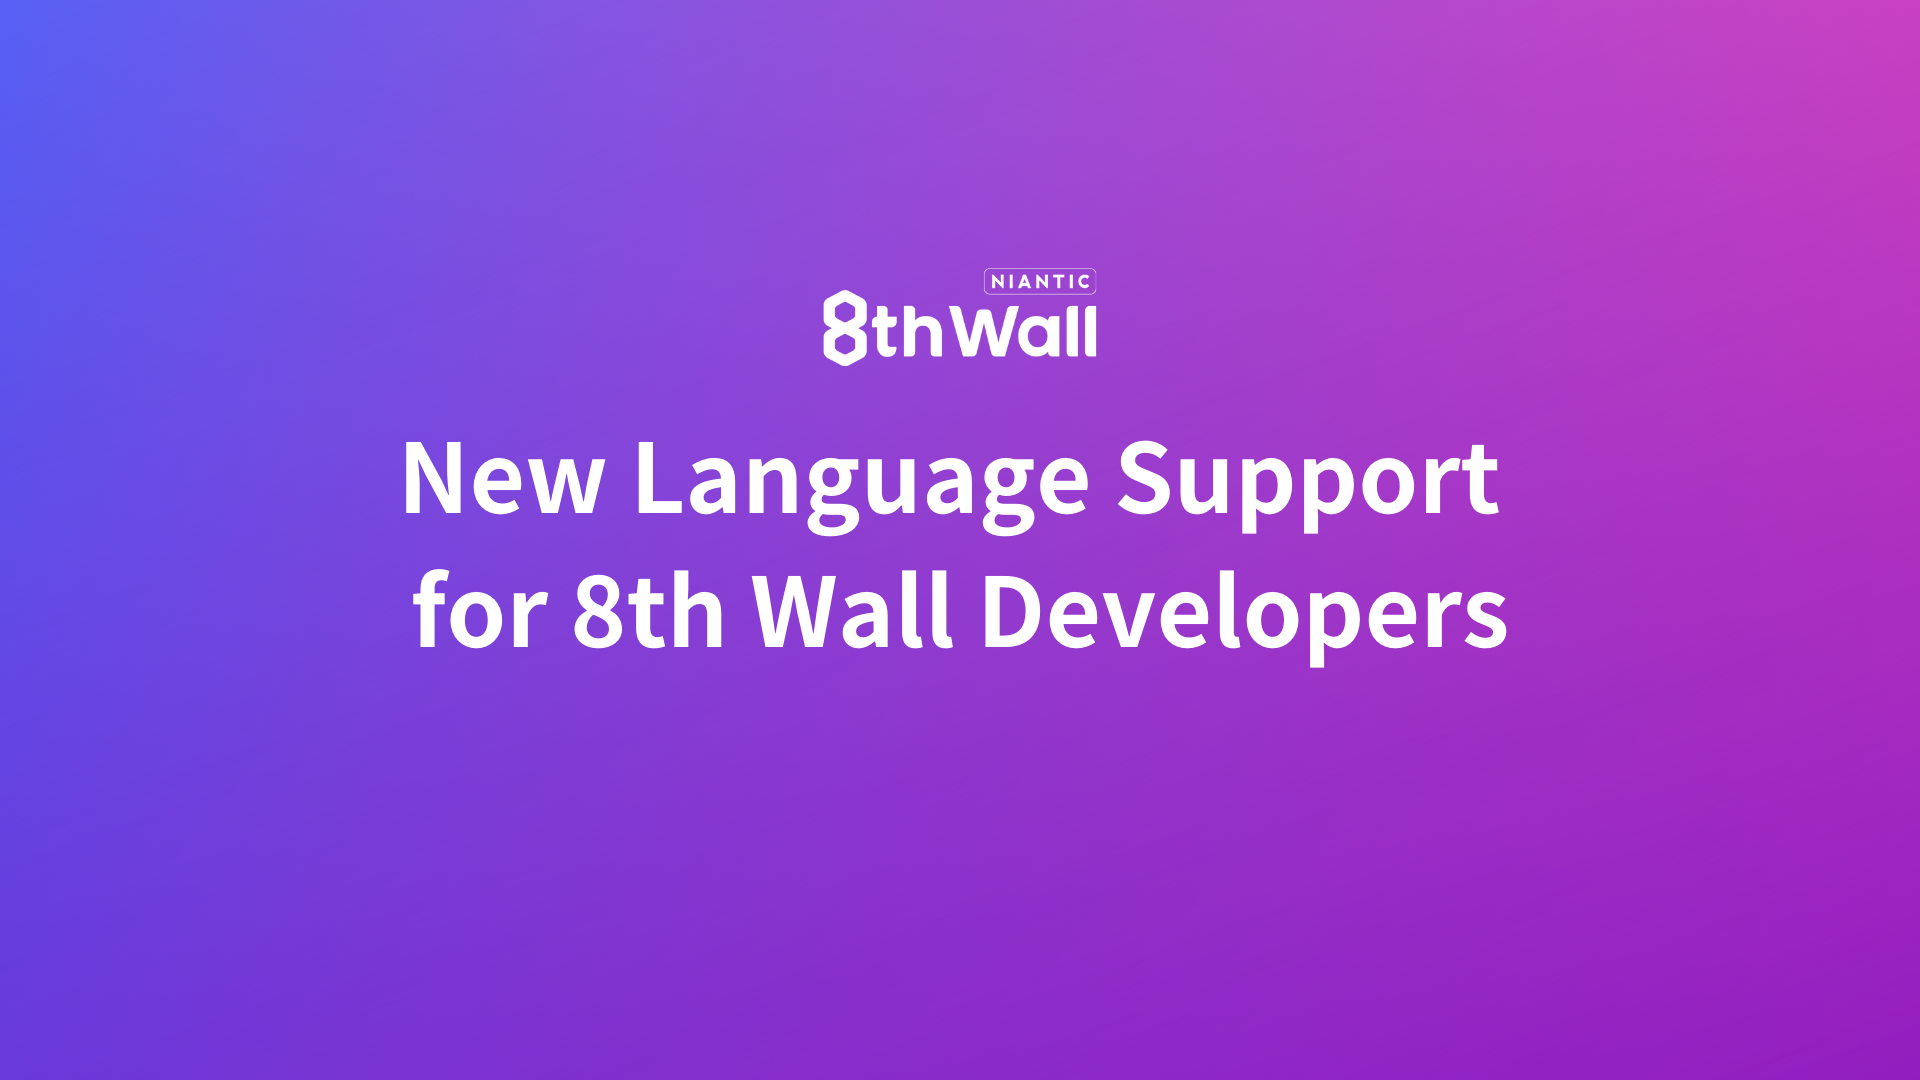 Empowering Japanese Developers: Niantic 8th Wall Adds Japanese Support